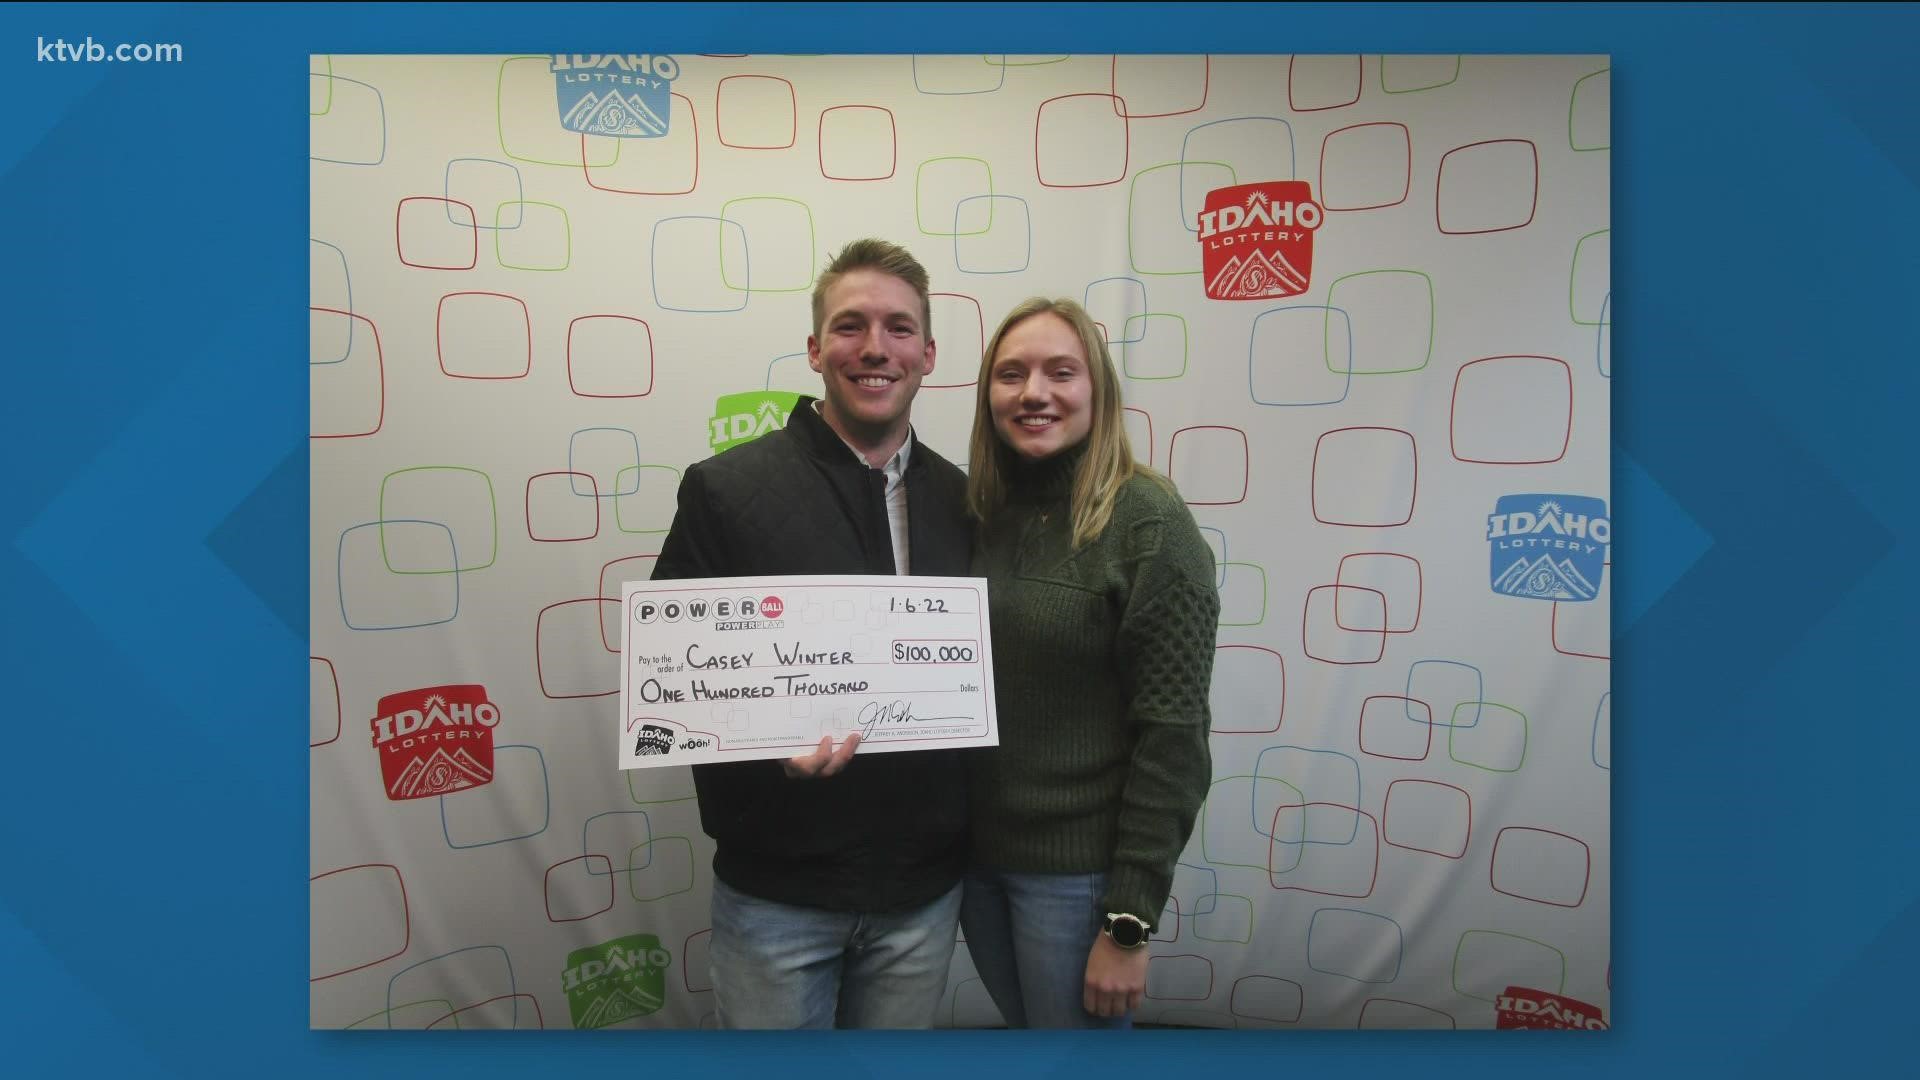 Casey Winter, a local firefighter, and his girlfriend won $100,000 from Monday’s Powerball drawing.